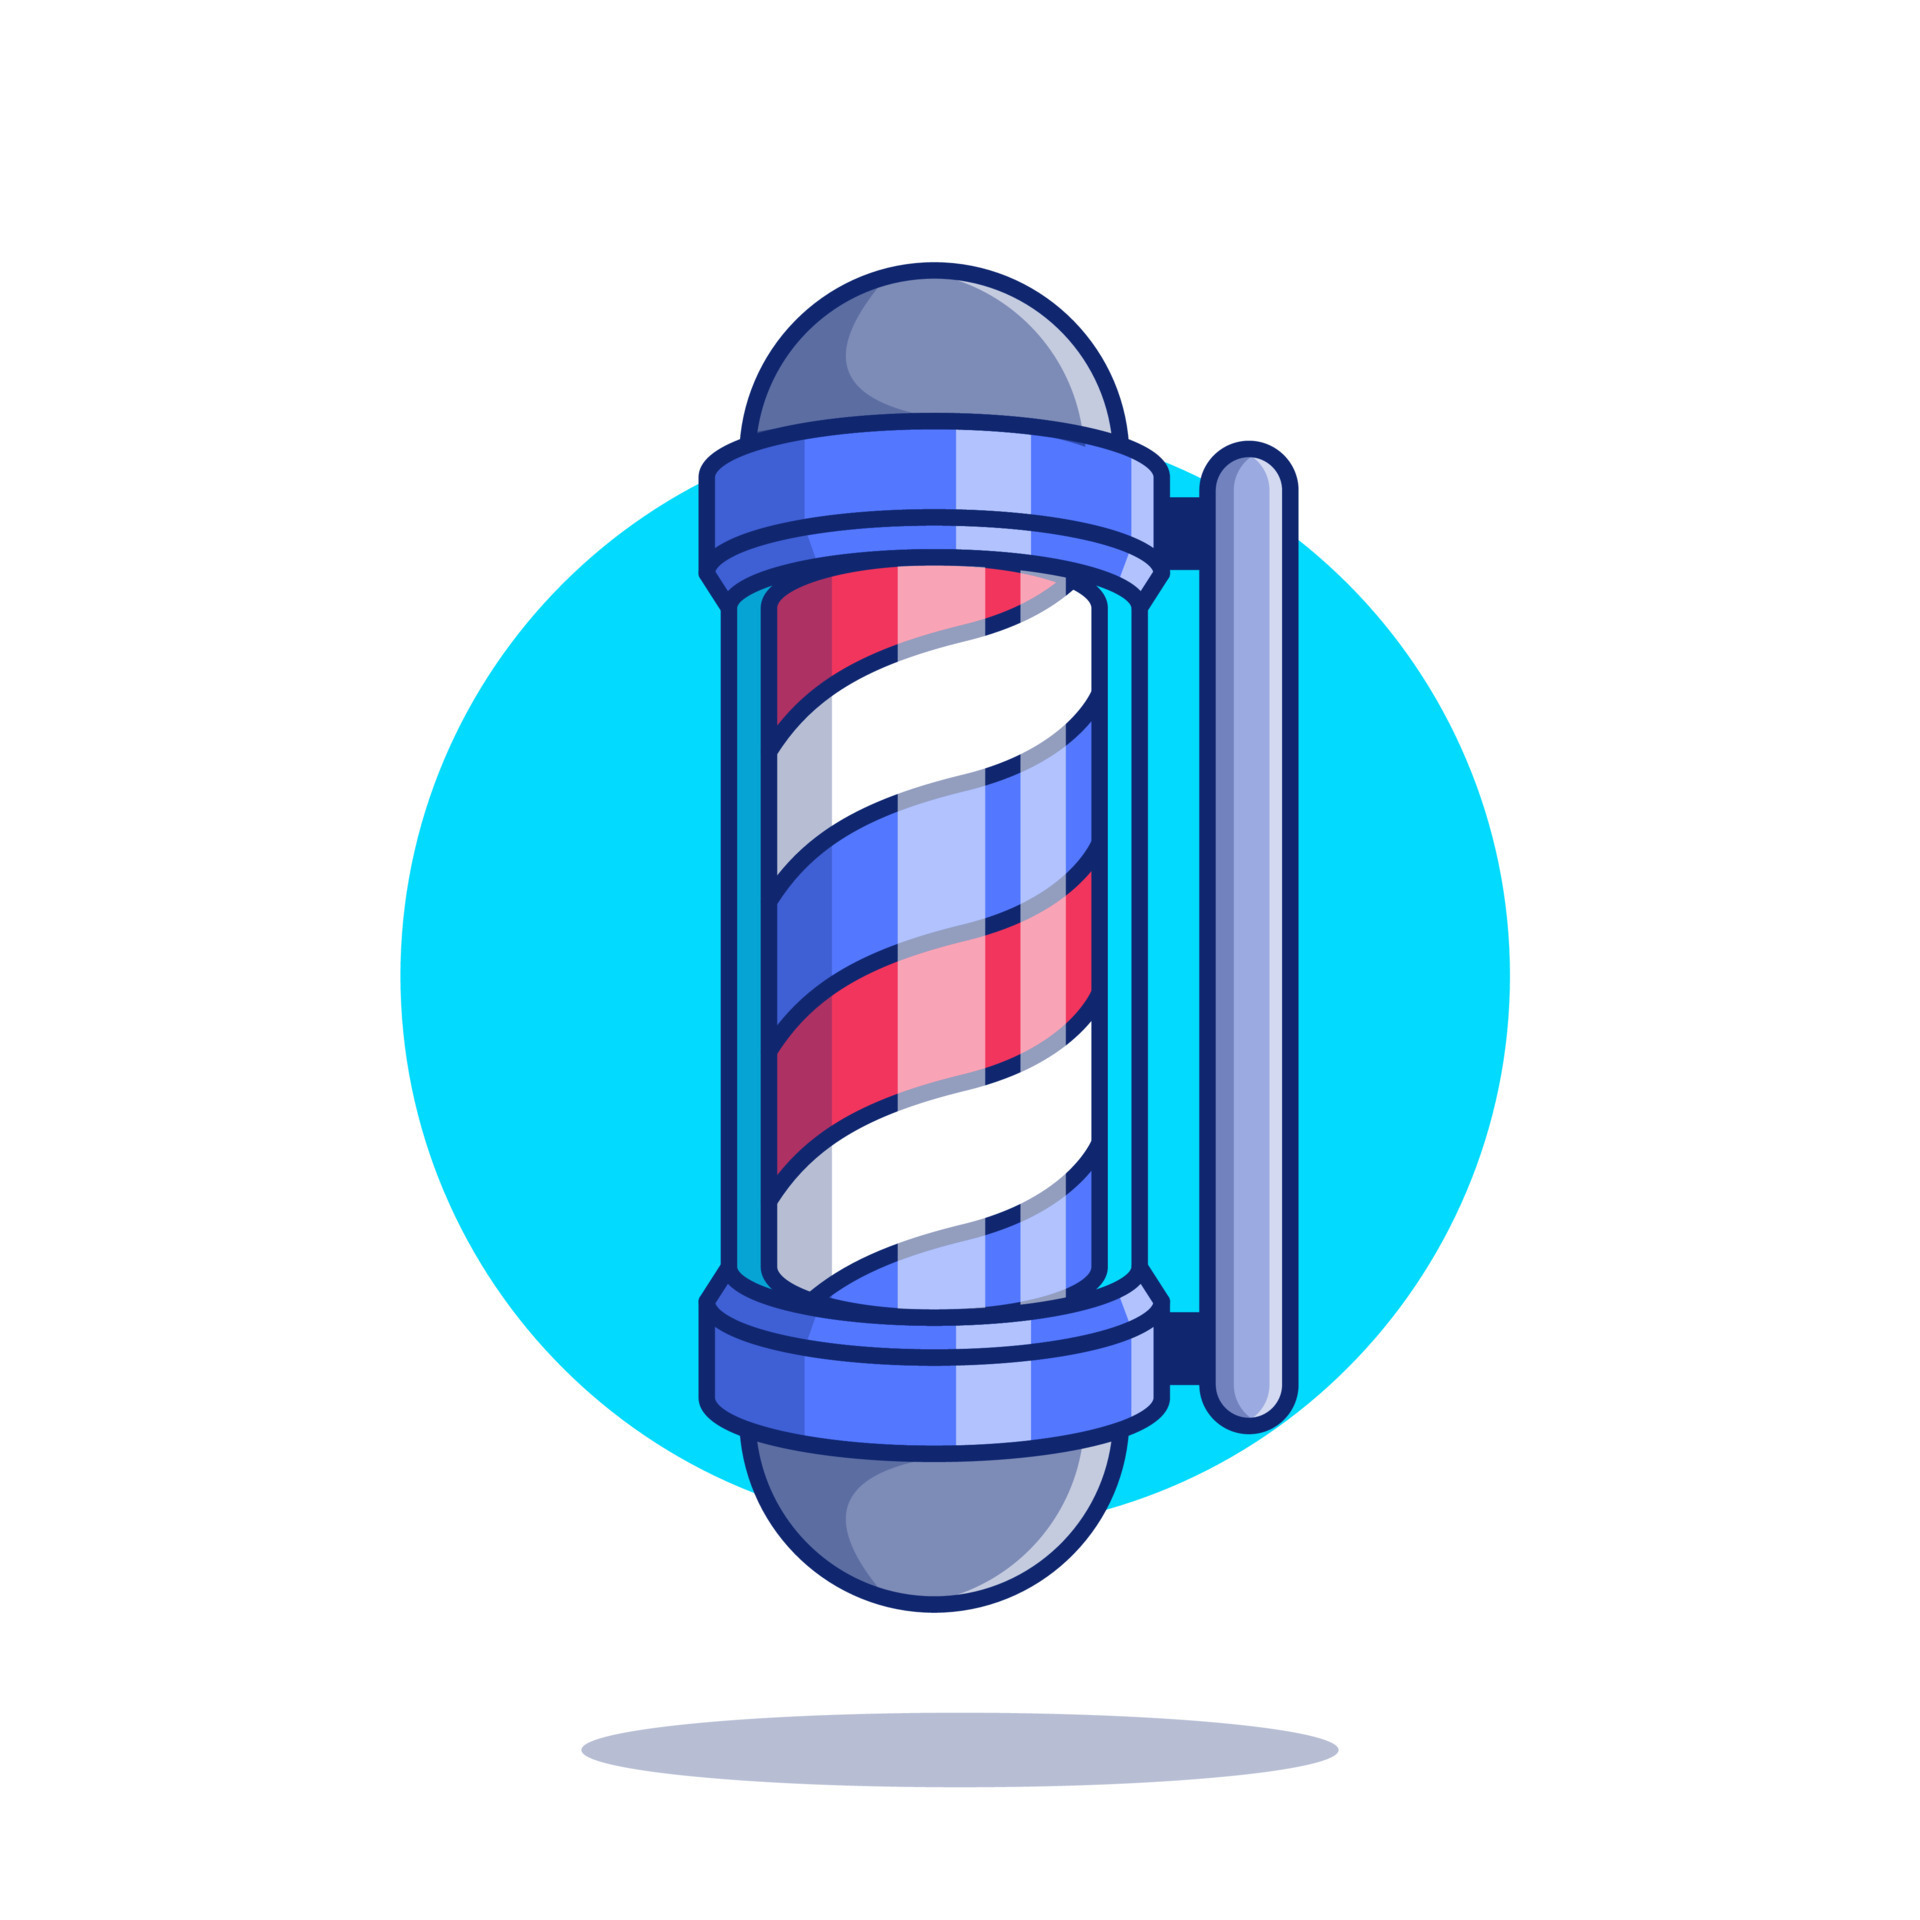 Barber Pole Cartoon Vector Icon Illustration. Barber Shop Tools Icon  Concept Isolated Premium Vector. Flat Cartoon Style 15025541 Vector Art at  Vecteezy